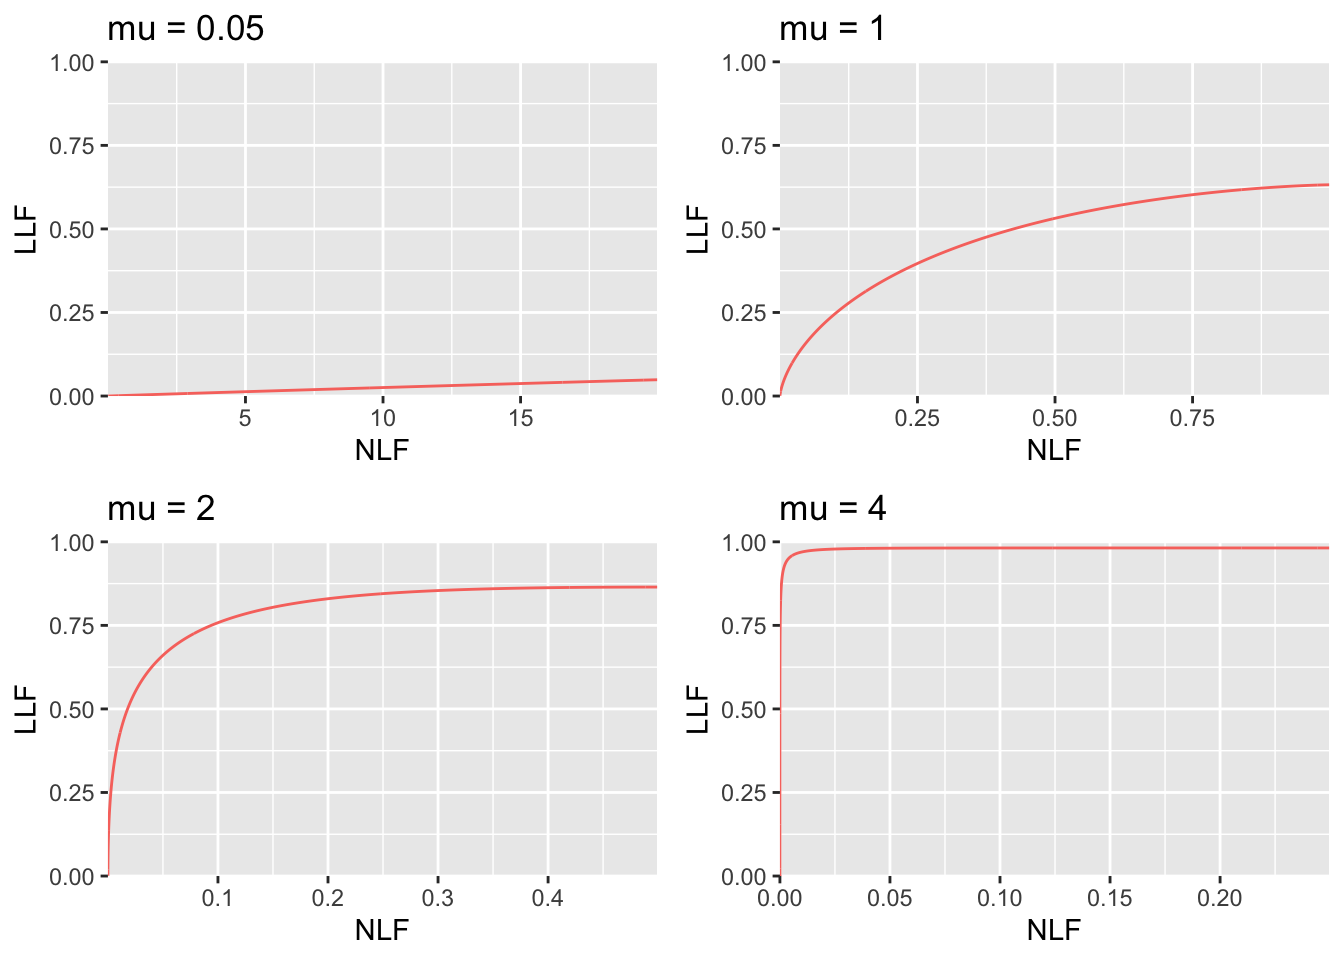 RSM-predicted FROC curves for indicated values of the $\mu$ parameter. As $\mu$ increases the curve approaches the top left corner, in the limit it is the vertical line connecting the origin to (0,1). Notice the wide range of variation of the x-axis scaling. In top left it ranges from 0 to 20 while in bottom right it ranges from 0 to 0.2. The total area under the FROC curve actually decreases as $\mu$ increases. Because it is not contained within the unit square, the FROC cannot be used as the basis of a meaningful figure of merit.